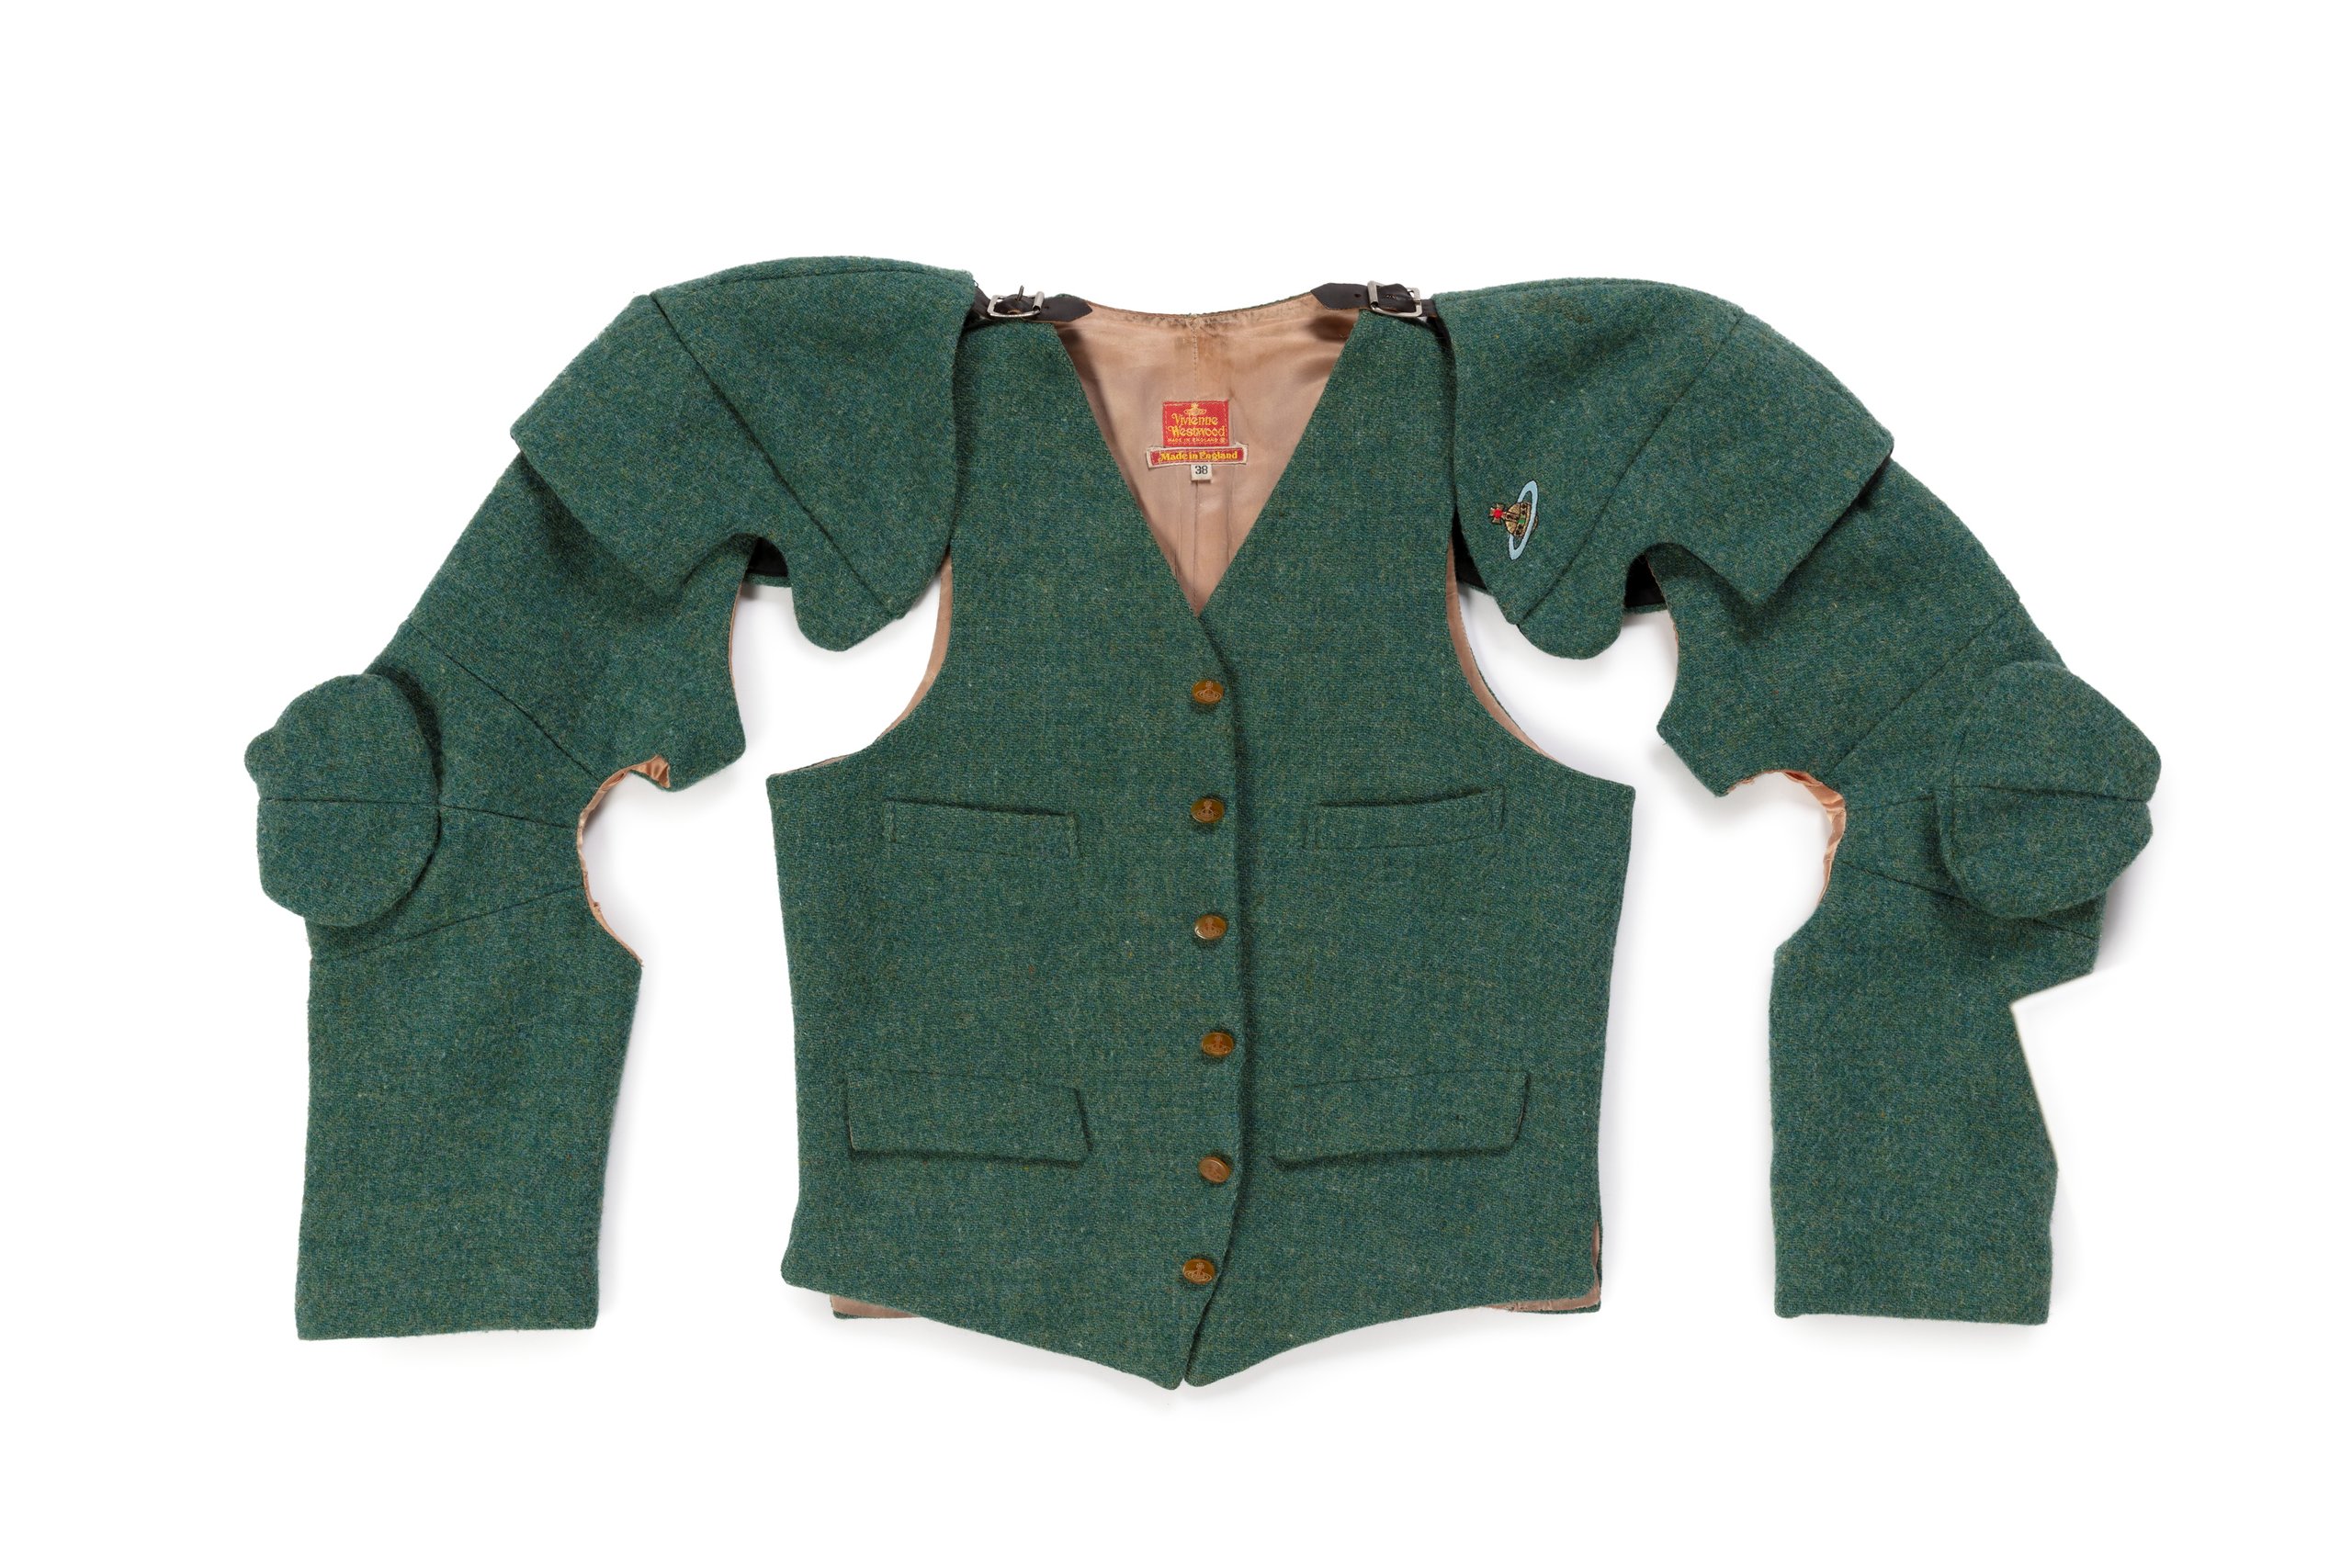 Powerhouse Collection - Harris Tweed 'Armour' jacket designed by Vivienne  Westwood and worn by Ross Wallace